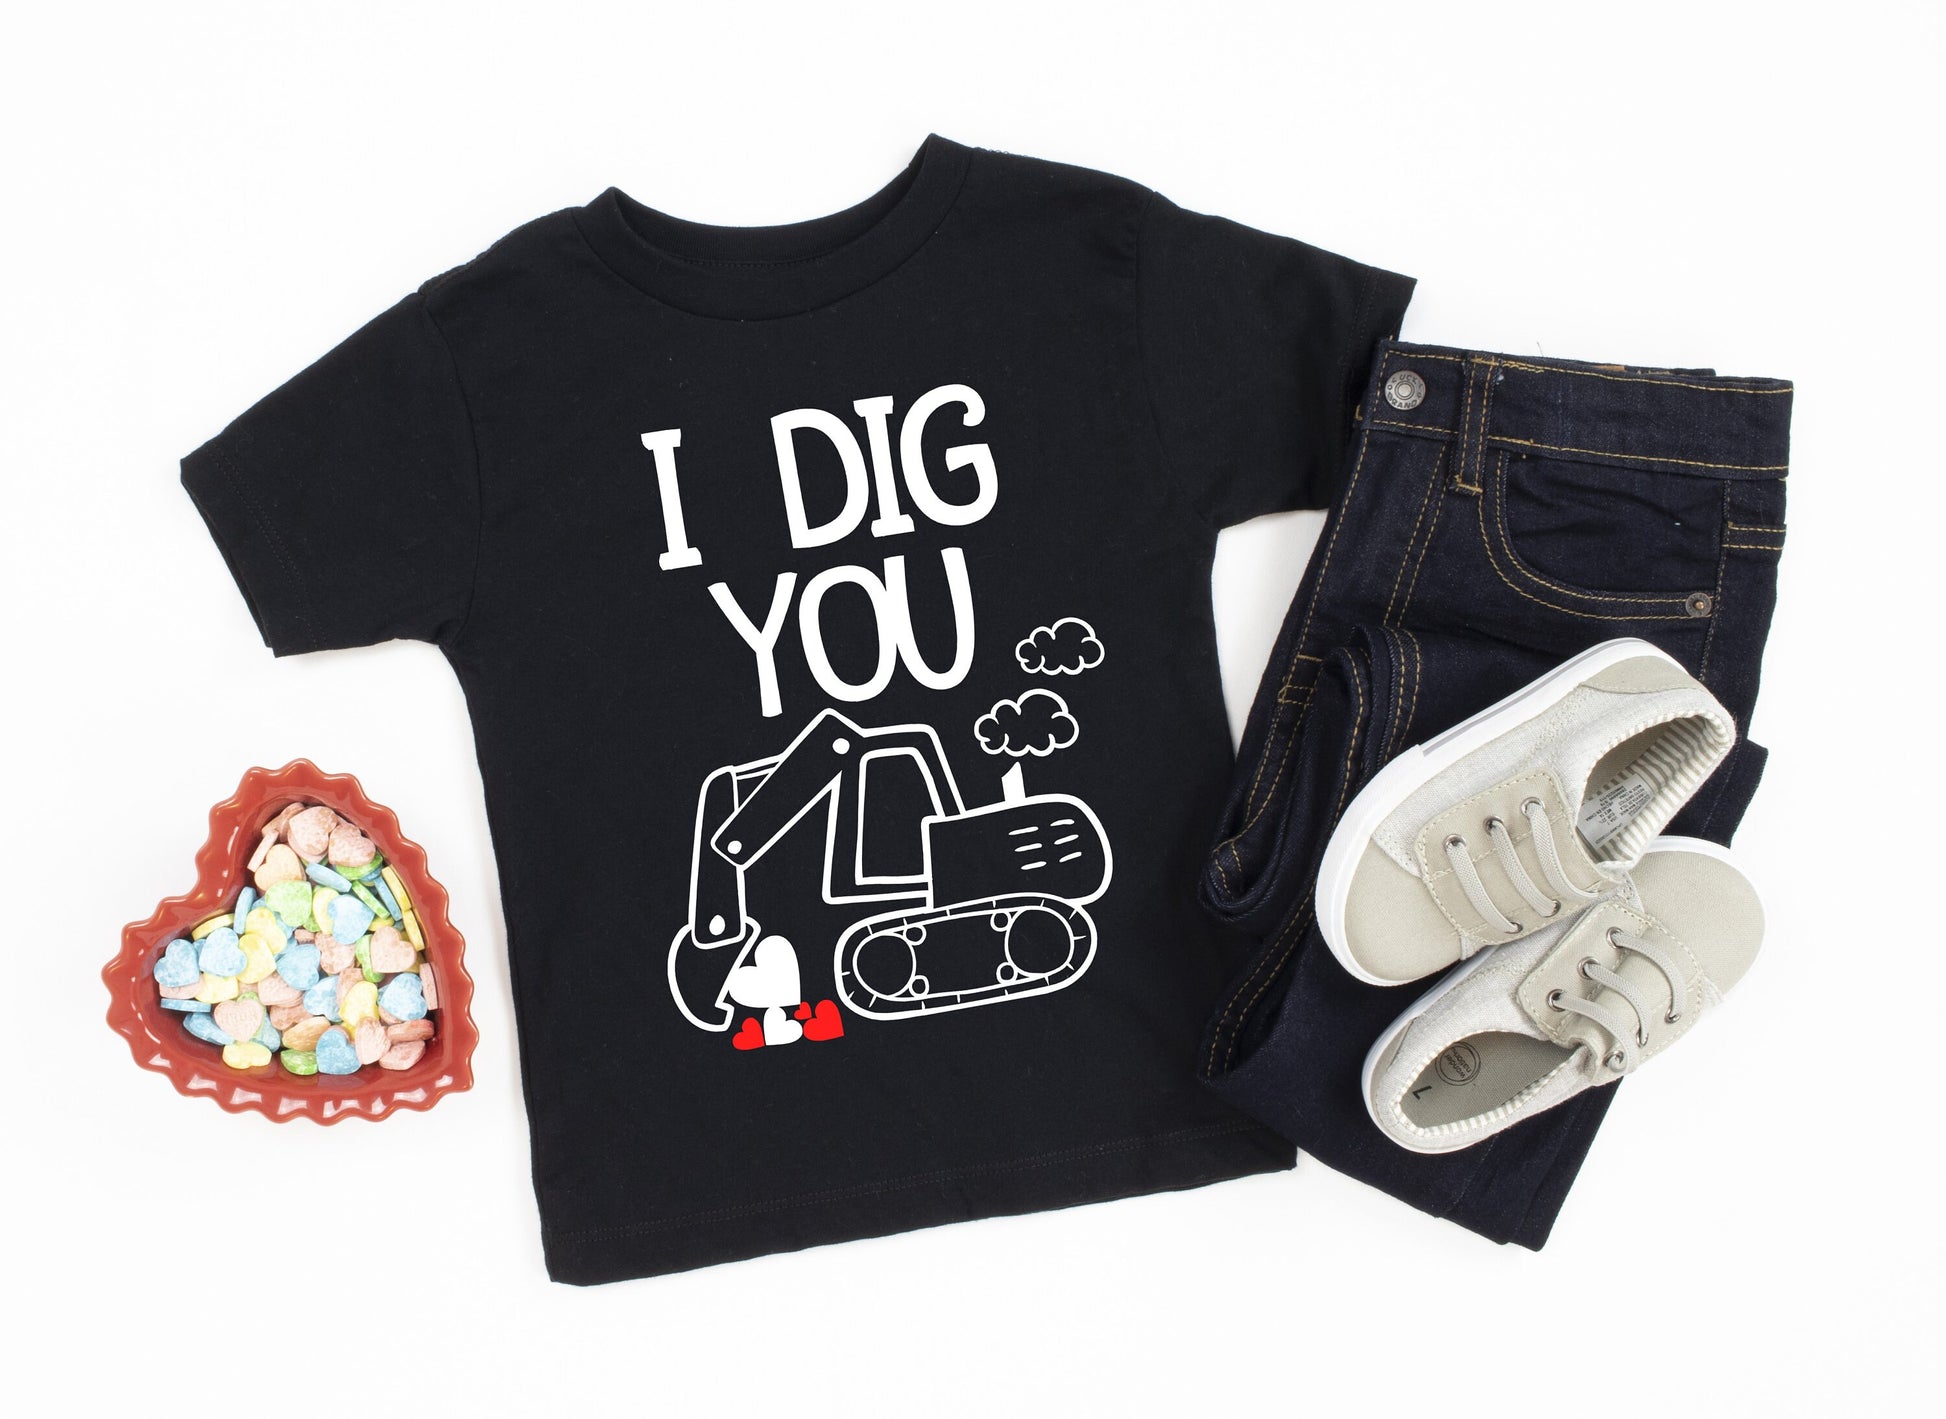 I Dig You Baby Toddler or Kids Shirt - Cute Toddler Shirt - excavator shirt - toddler boy shirt - toddler life shirt - valentines day shirt